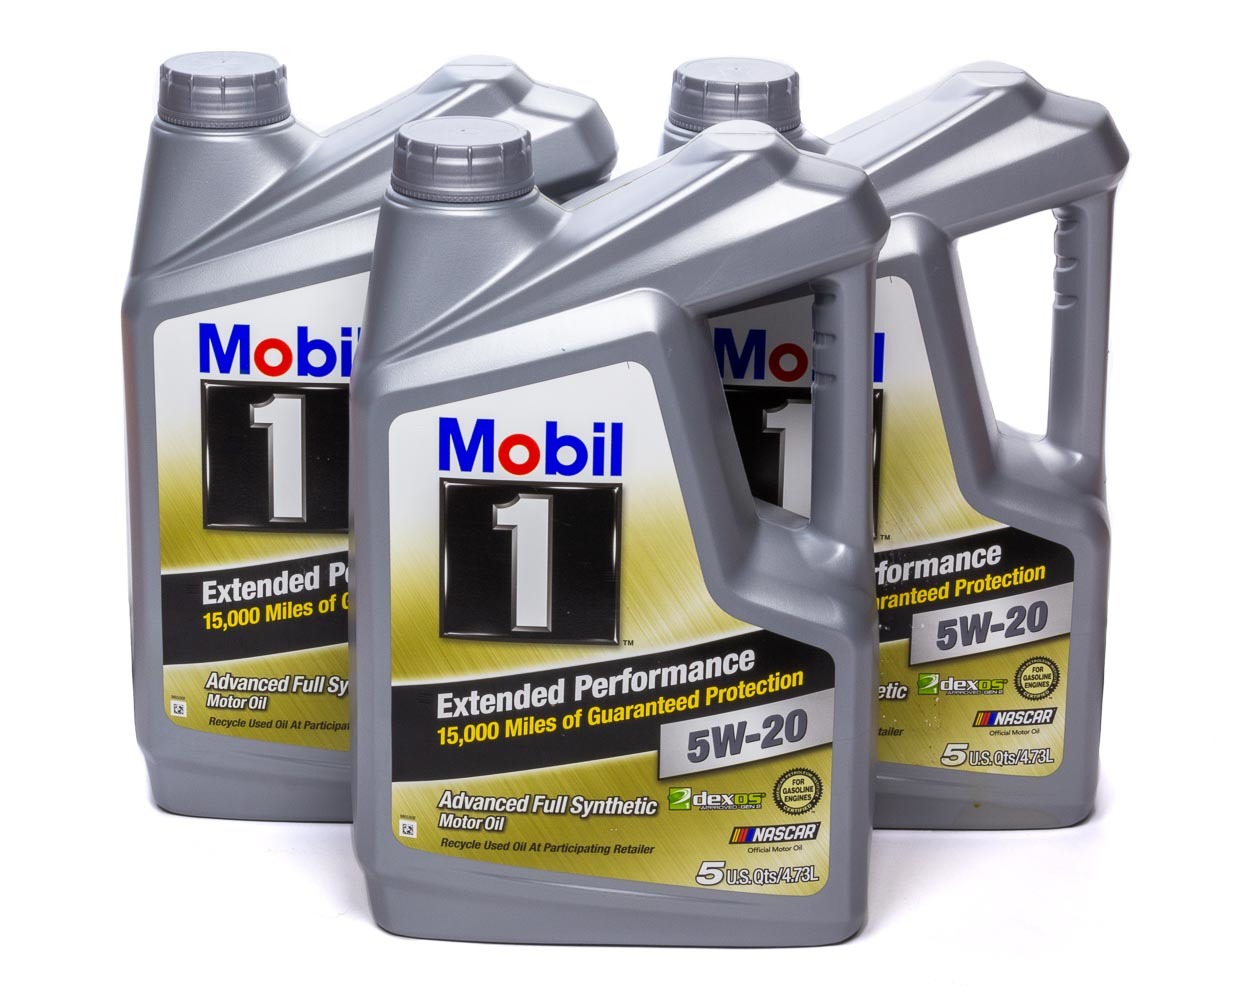 MOBIL 1 Motor Oil Extended Performance 5W20 Synthetic 5 qt Jug Set of 3